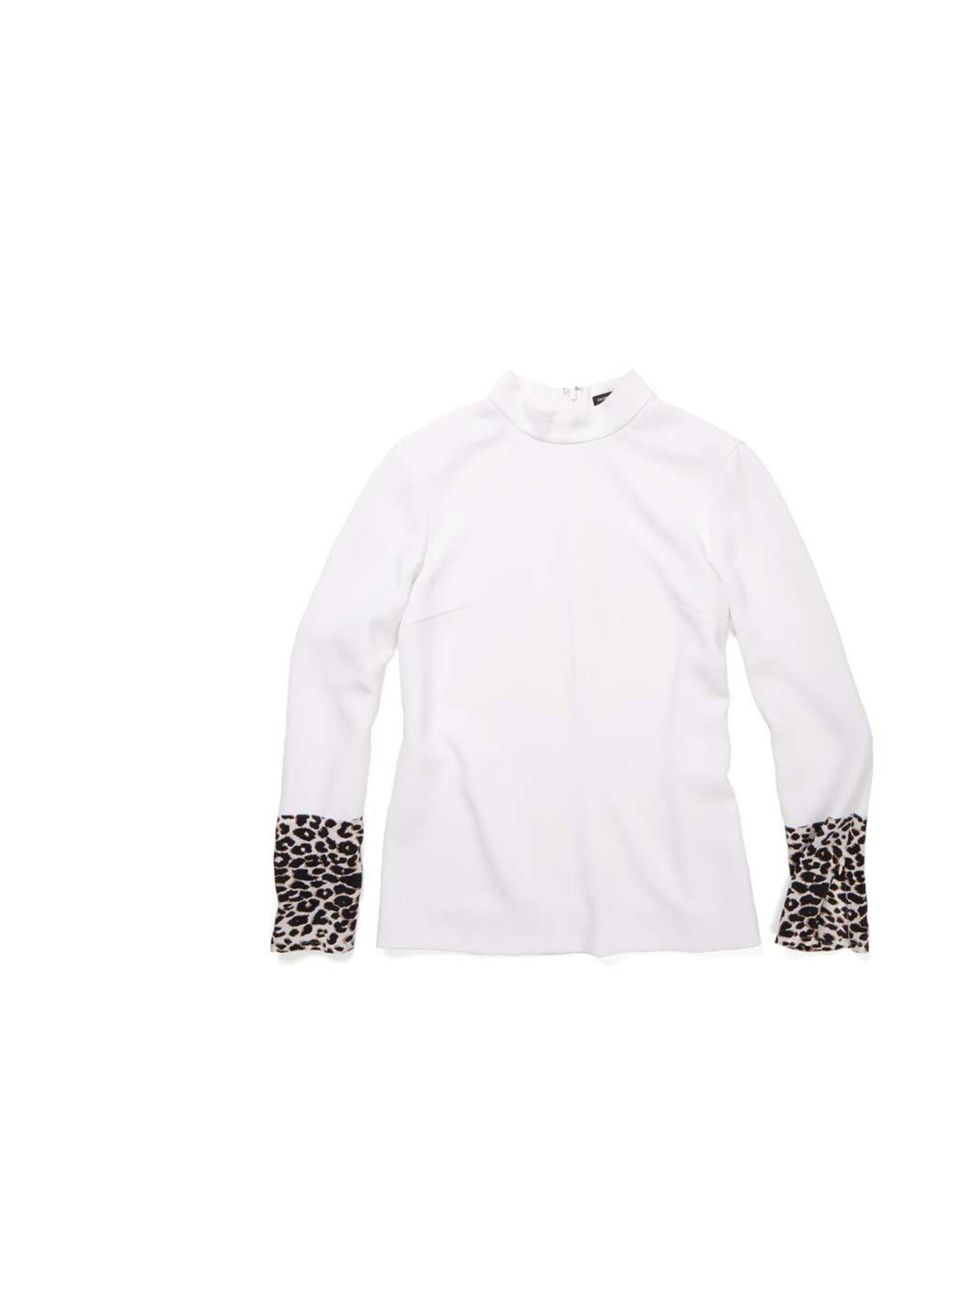 <p>This minimal white top has a wild side - we love the addition of quirky leopard print cuffs.</p><p>Club Monaco top, £160</p>